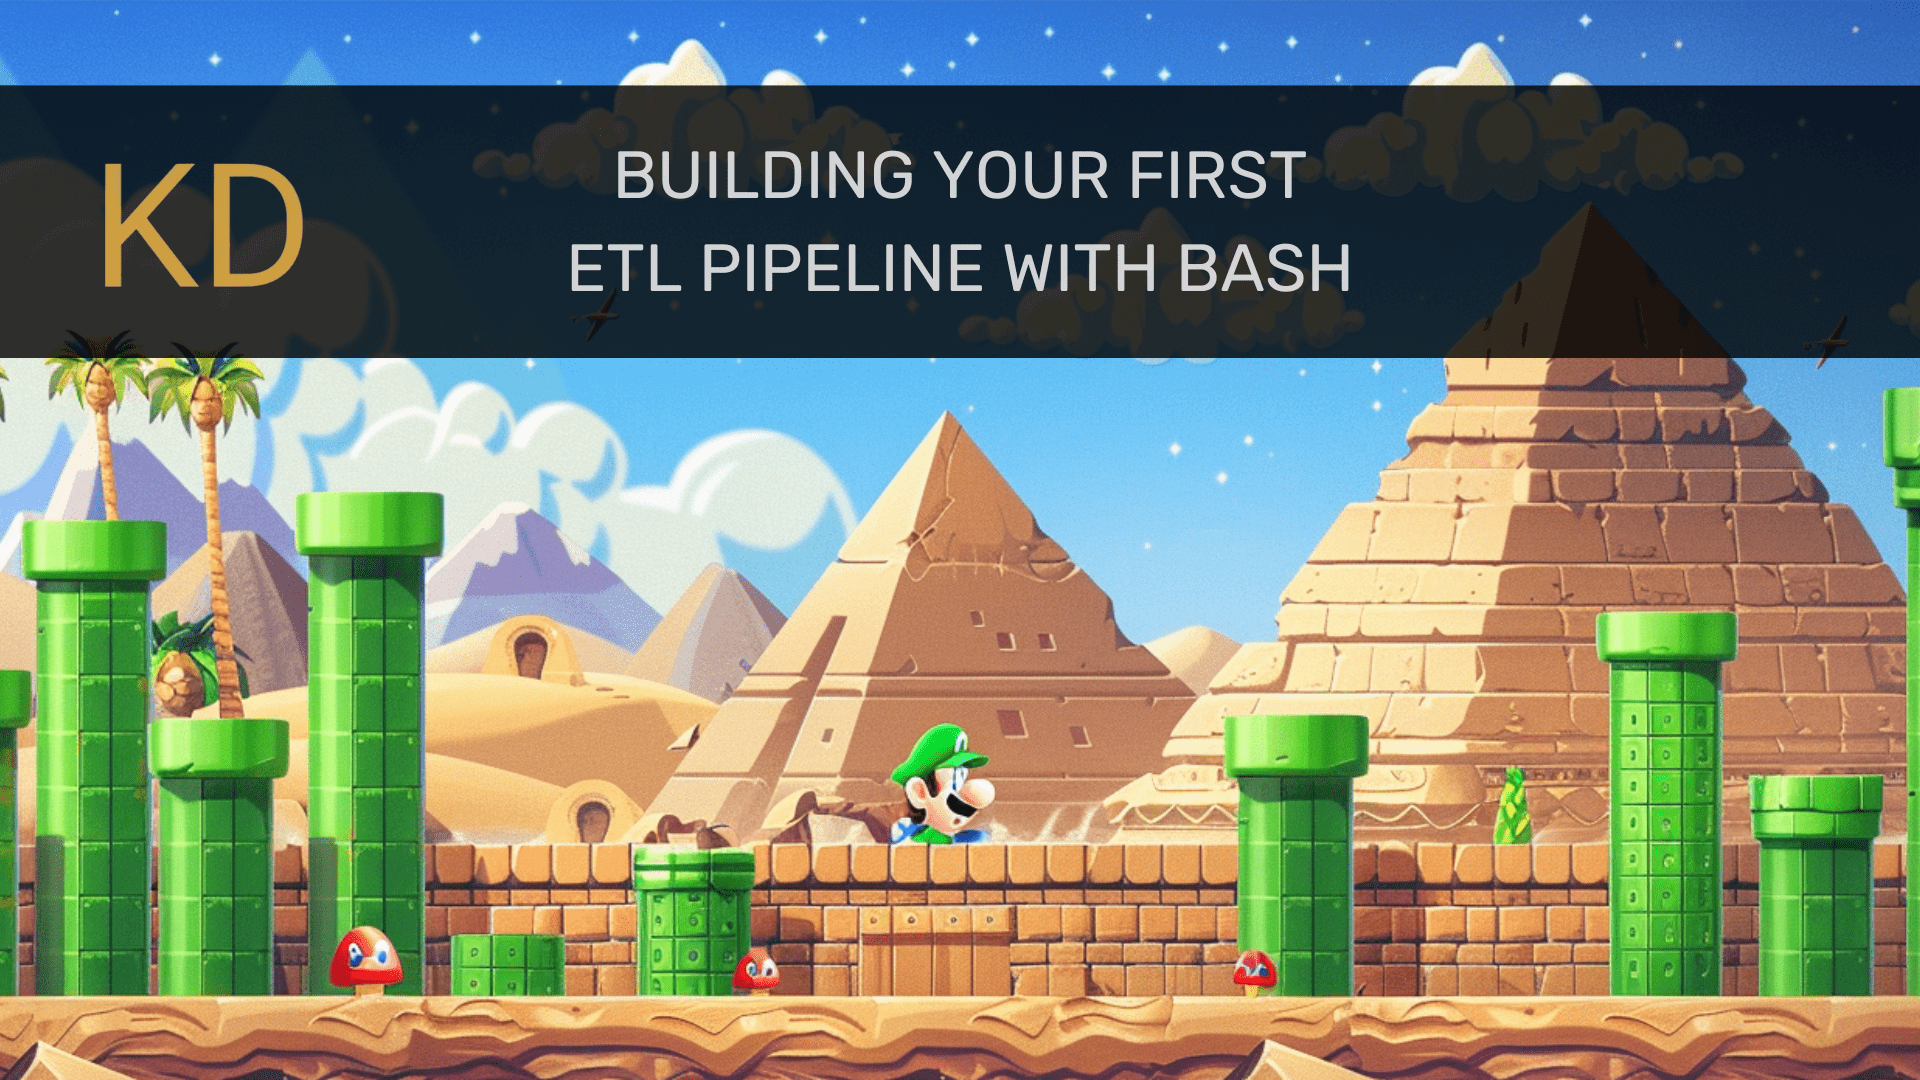 Building Your First ETL Pipeline with Bash